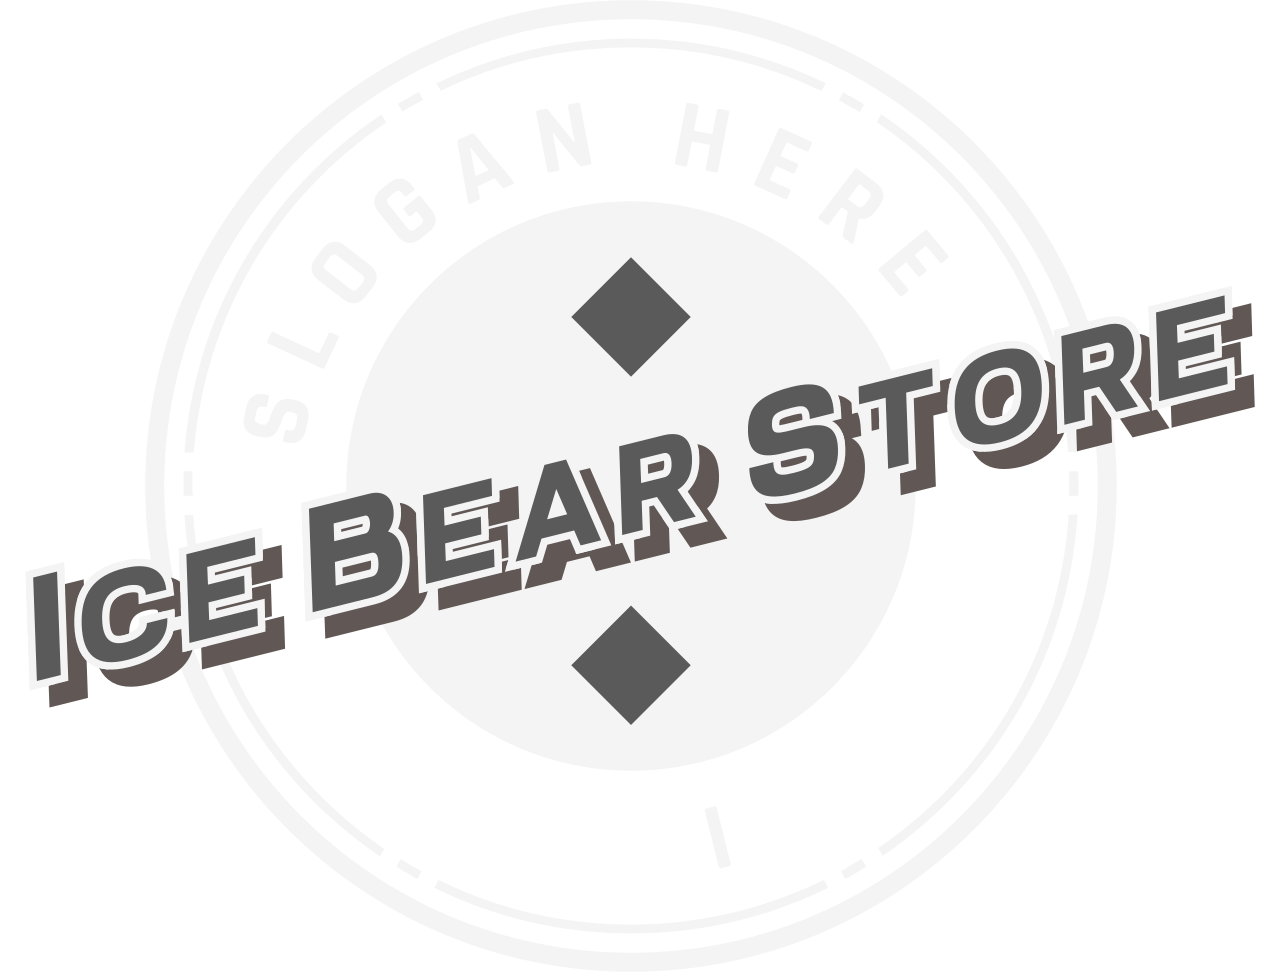 Ice Bear Store's web page